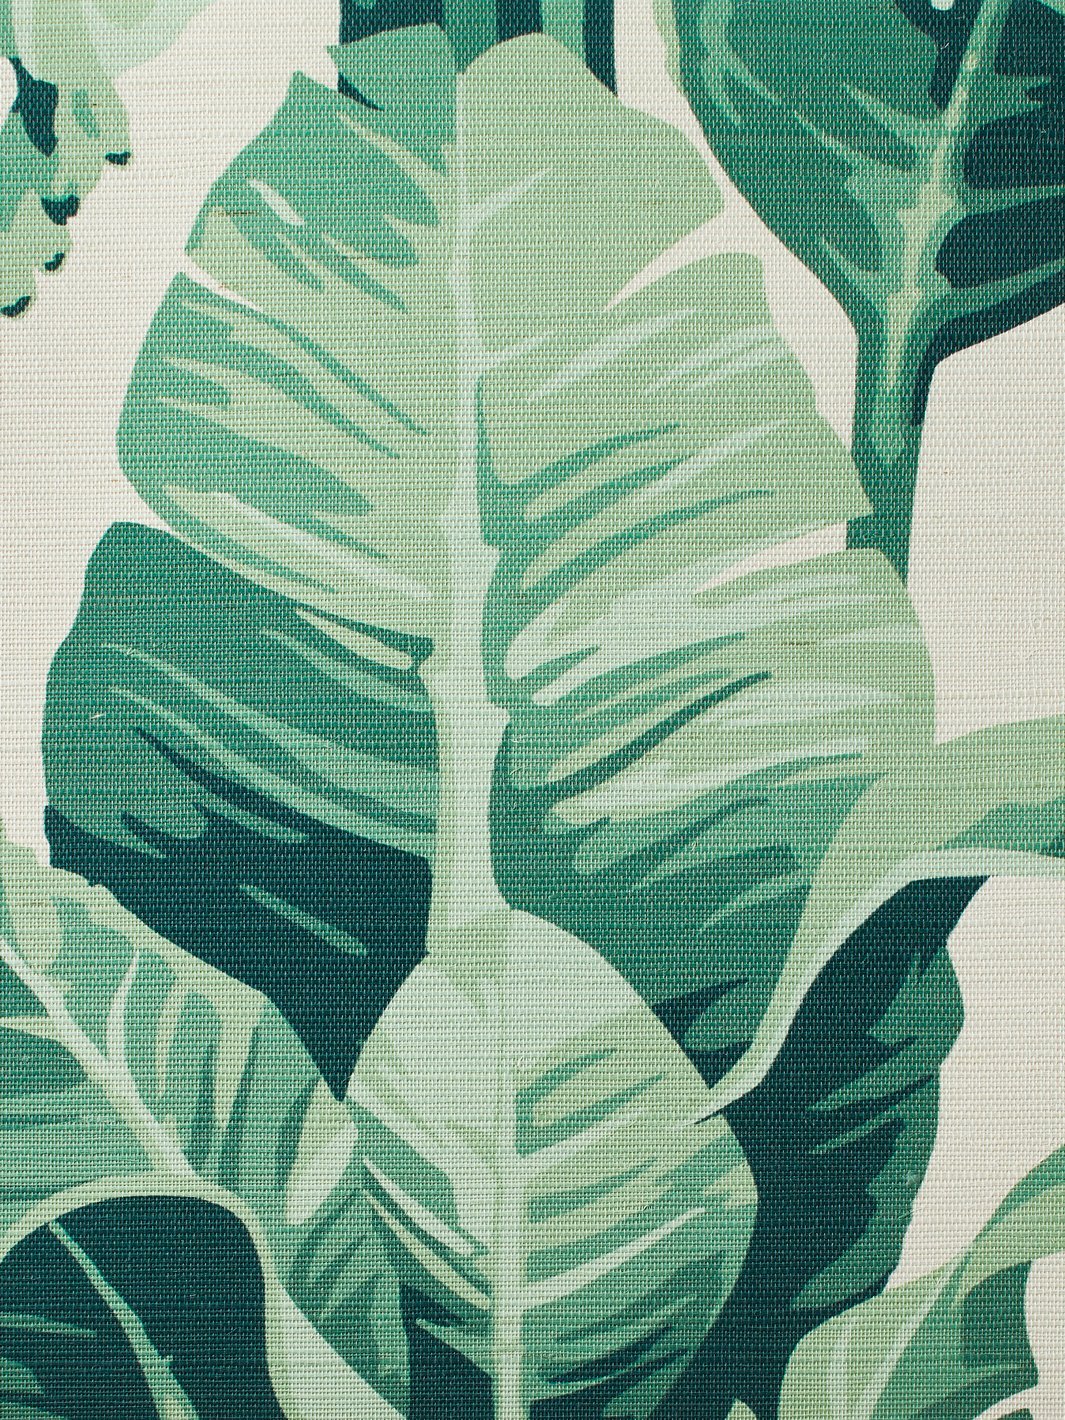 'Pacifico Palm' Grasscloth' Wallpaper by Nathan Turner - Ivory